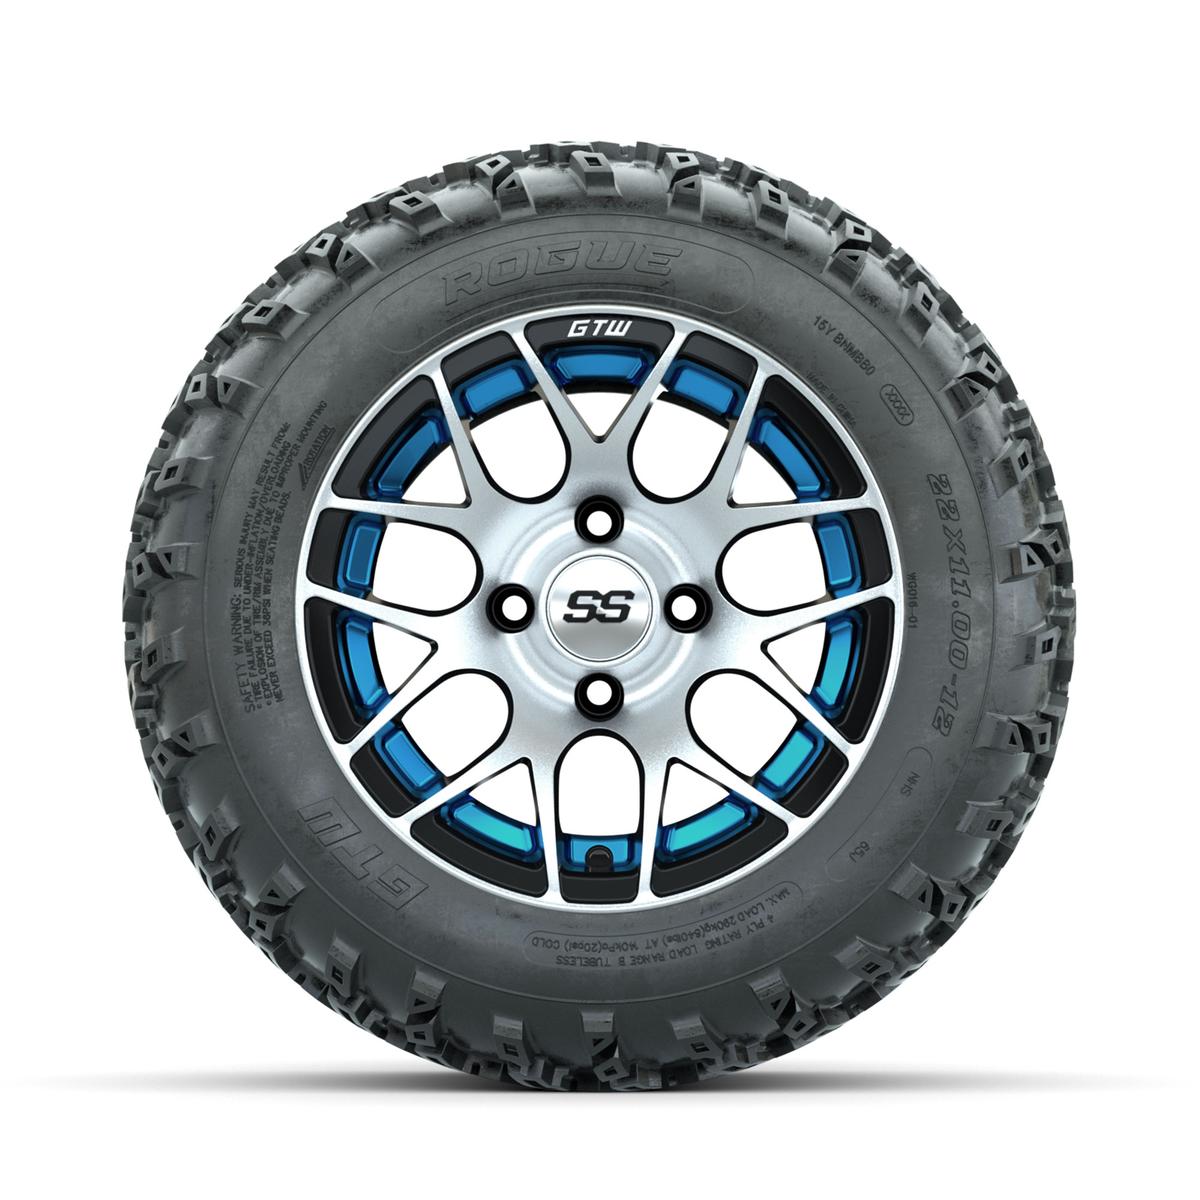 GTW Pursuit Blue 12 in Wheels with 22x11.00-12 Rogue All Terrain Tires – Full Set